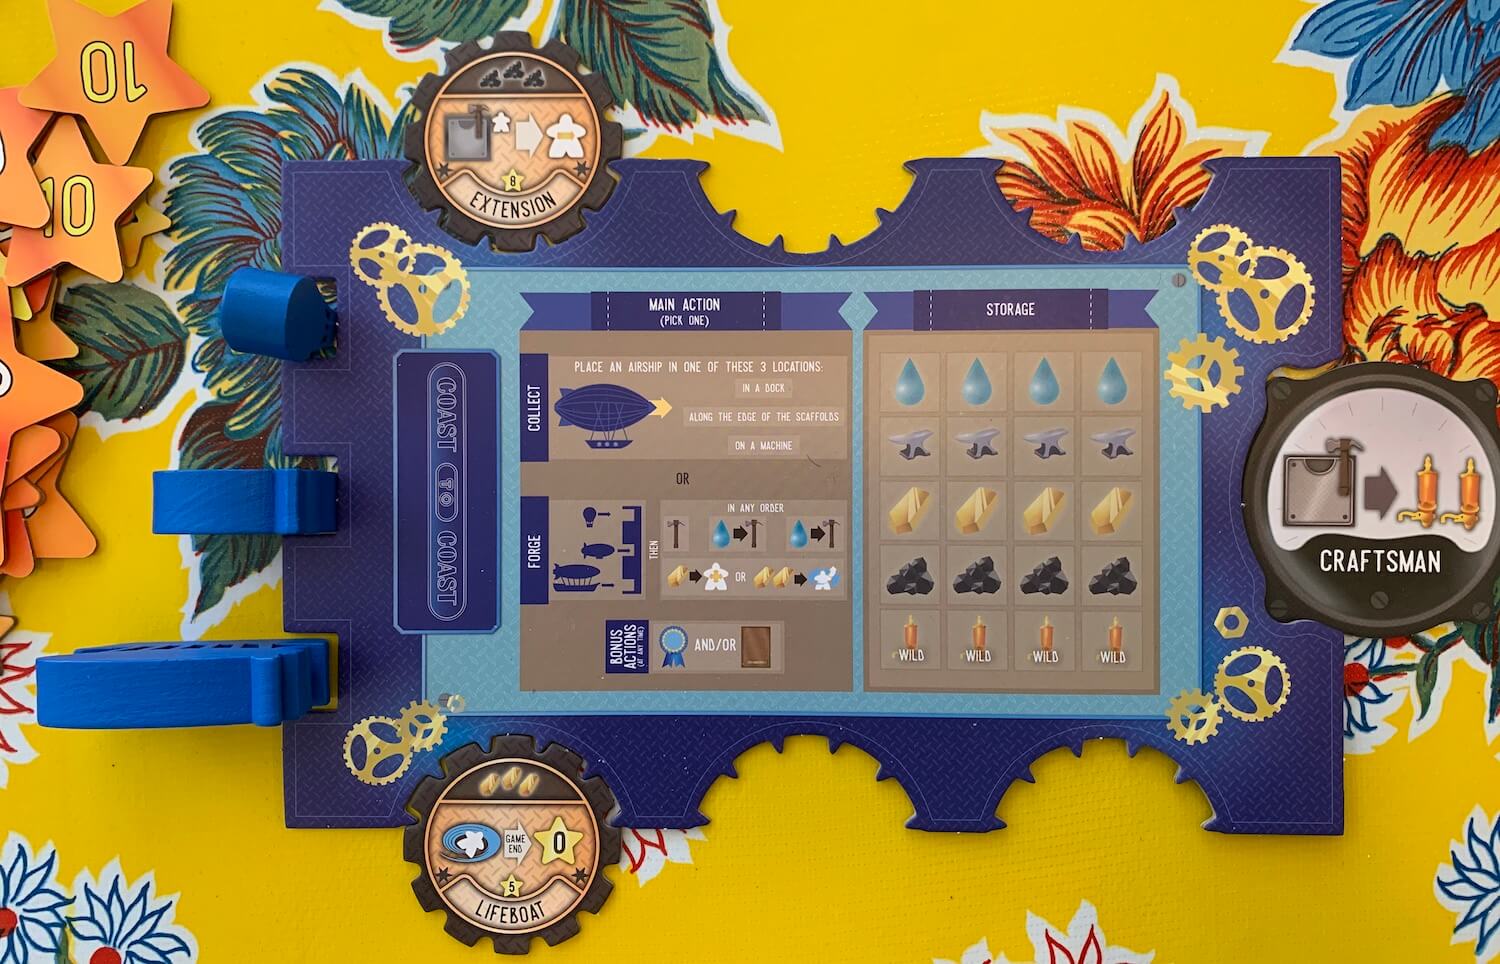 The Whistle Mountain player board holds spots for various upgrades and a starting ability